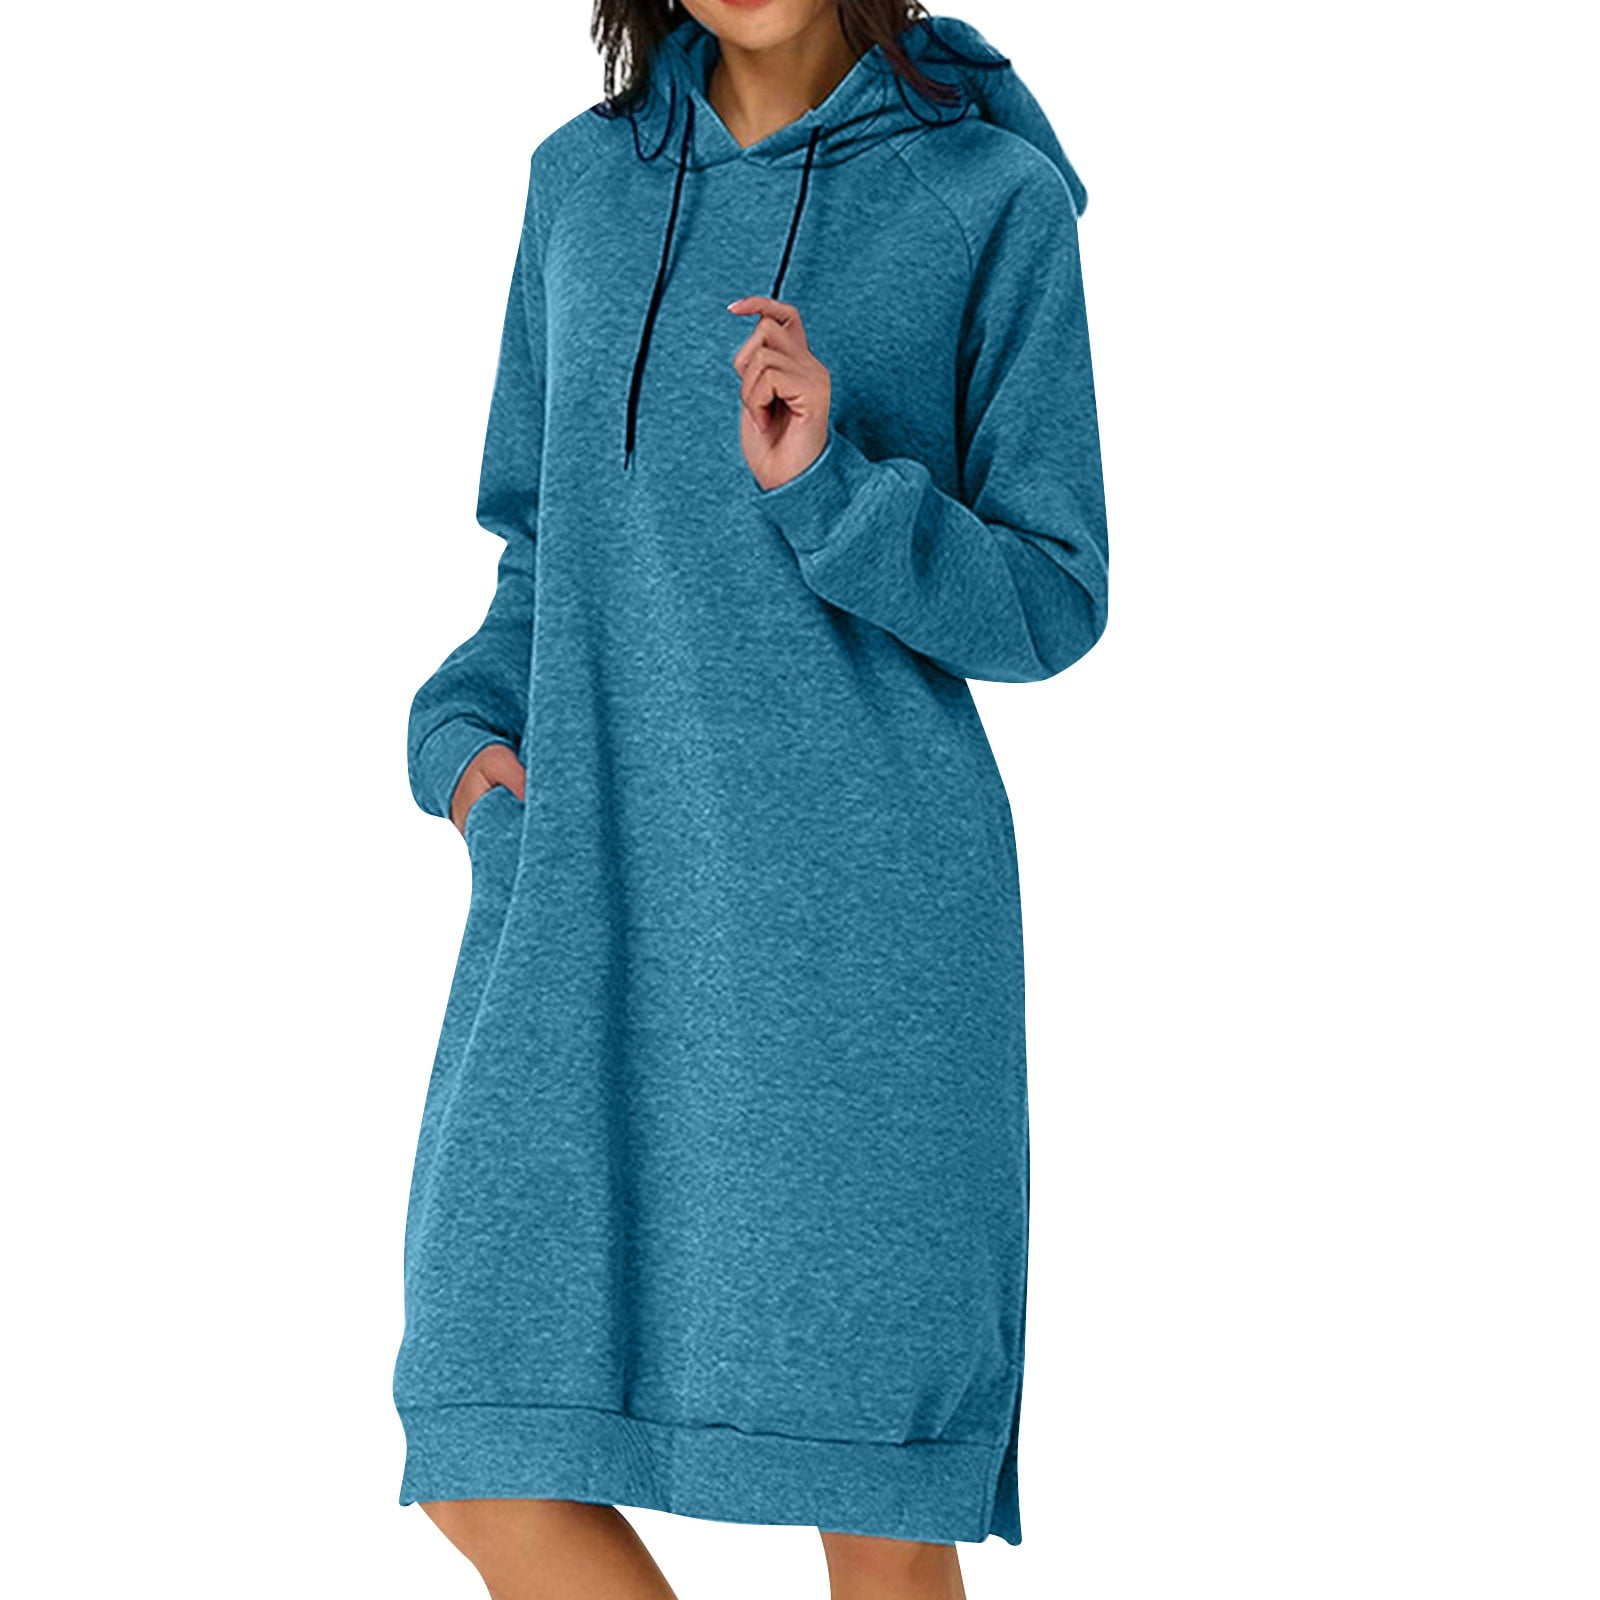 Biziza Women's Solid Comfort Plus Size Hoodie Dress with Pockets Long ...